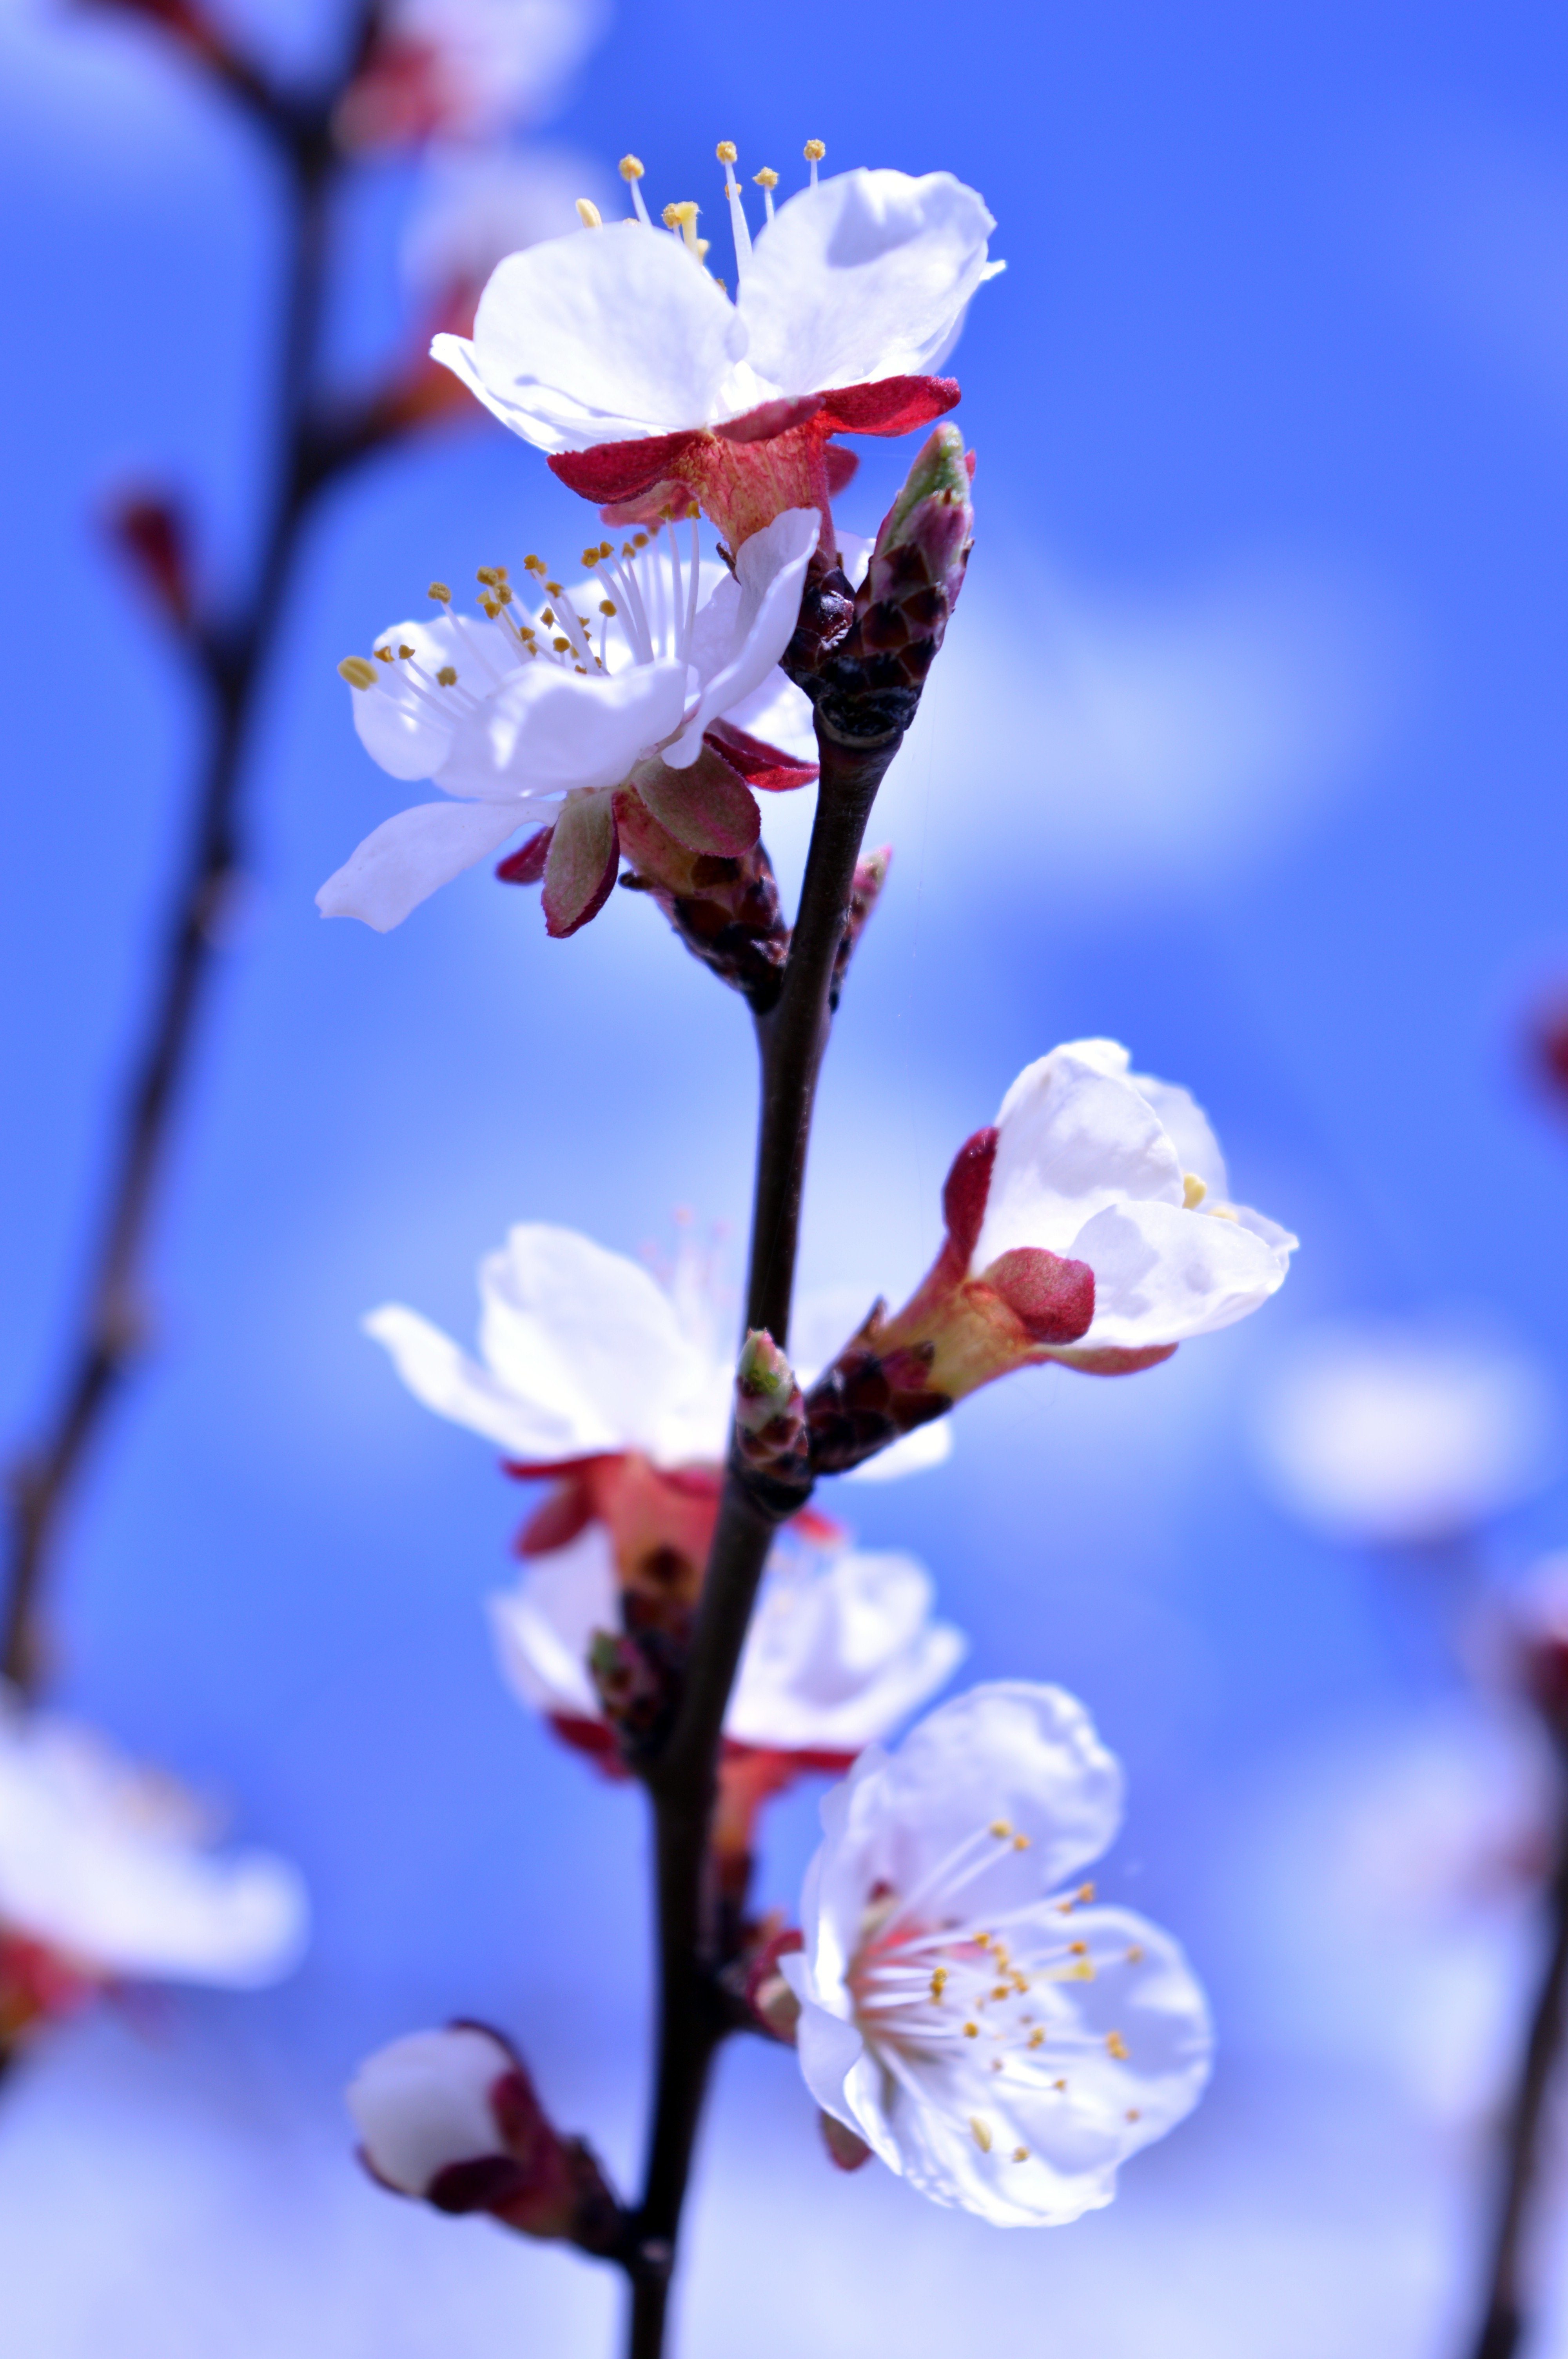 flowers, Nature, Blue, Spring, Blurred Wallpaper